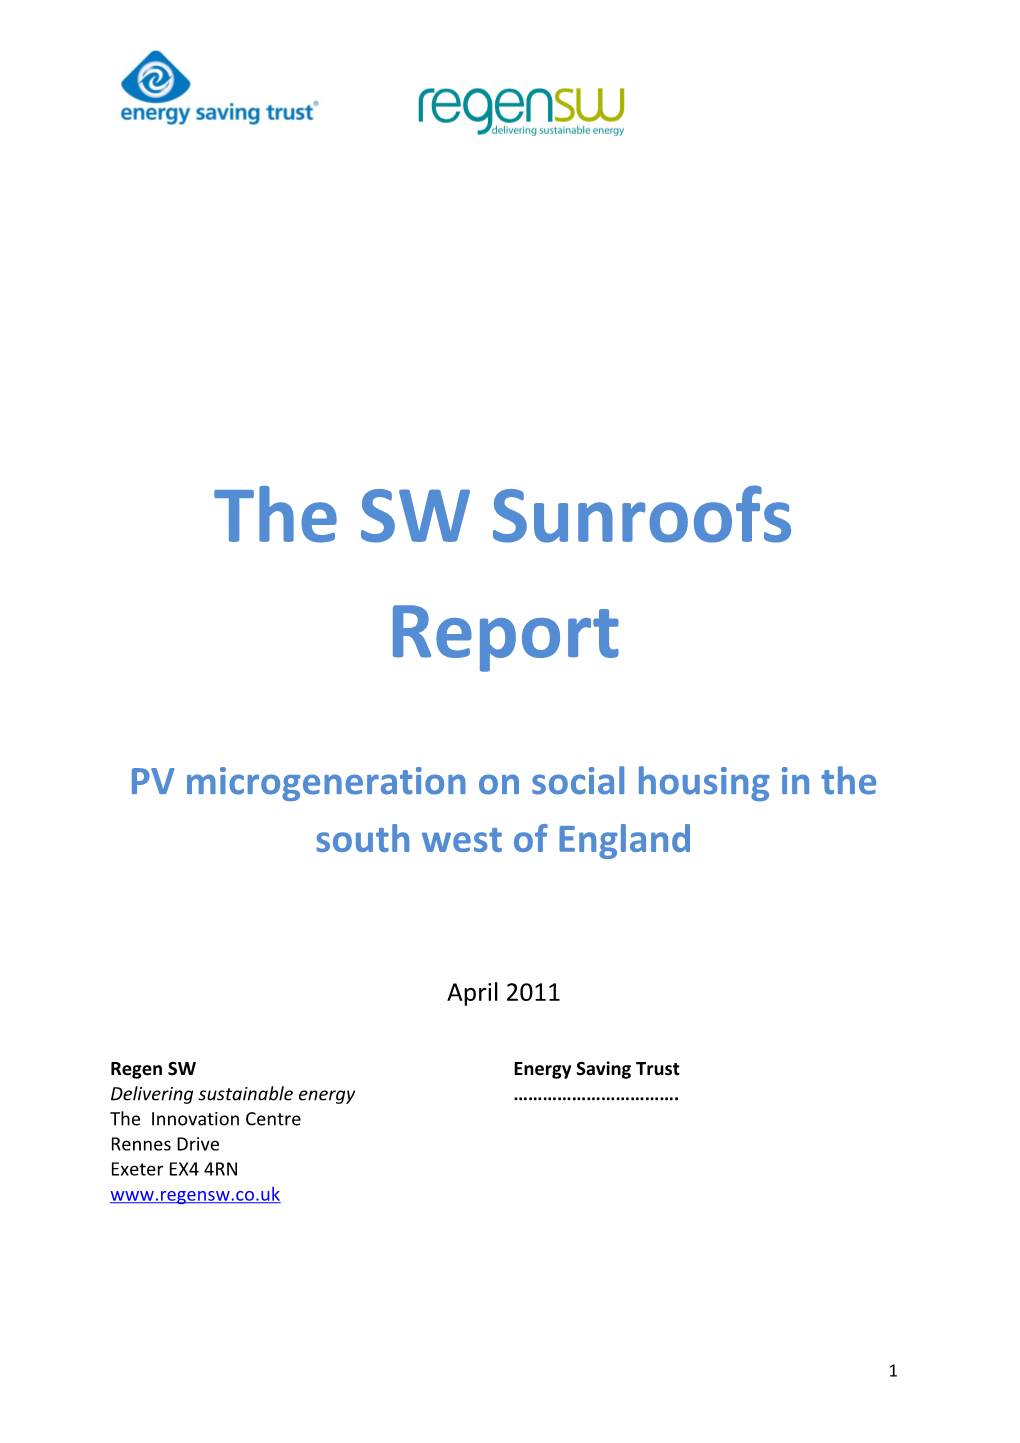 PV Microgeneration on Social Housing in the South West of England